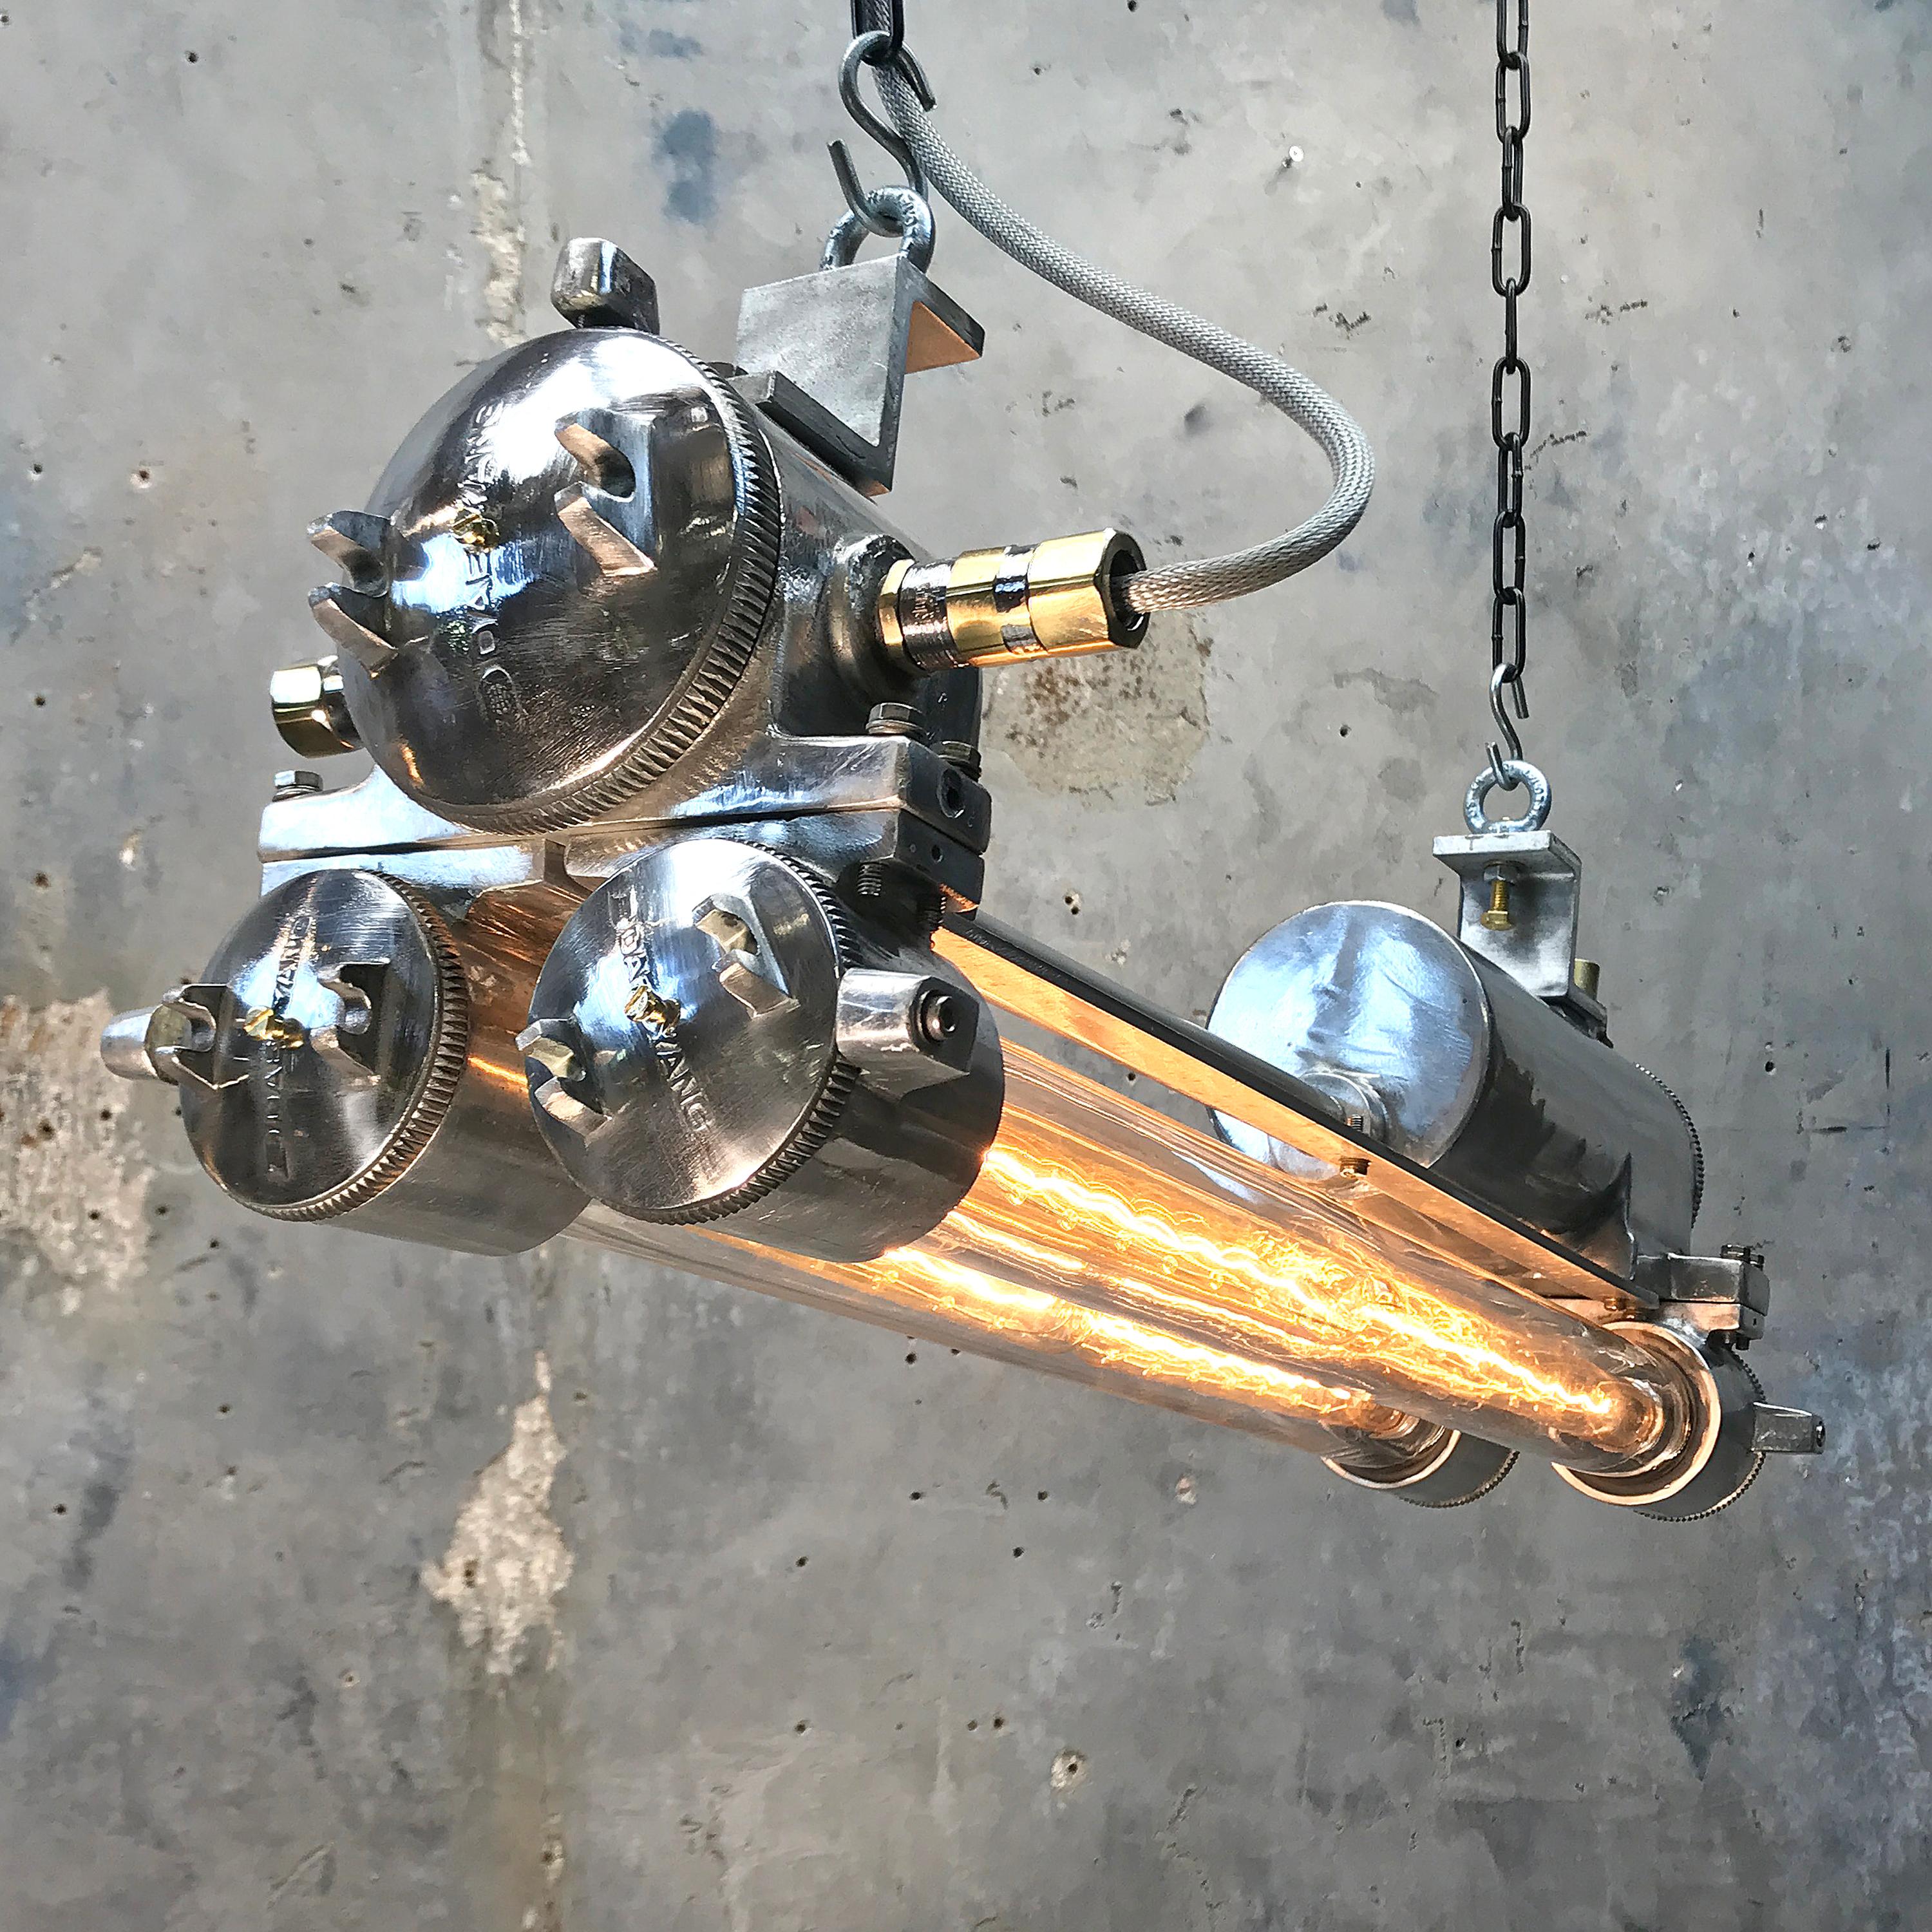 Reclaimed vintage industrial Korean flameproof striplight made by Daeyang in the 1970's with highly polished finish.
 
Original item salvaged from supertankers and military vessels then professionally restored by Loomlight in the UK ready for